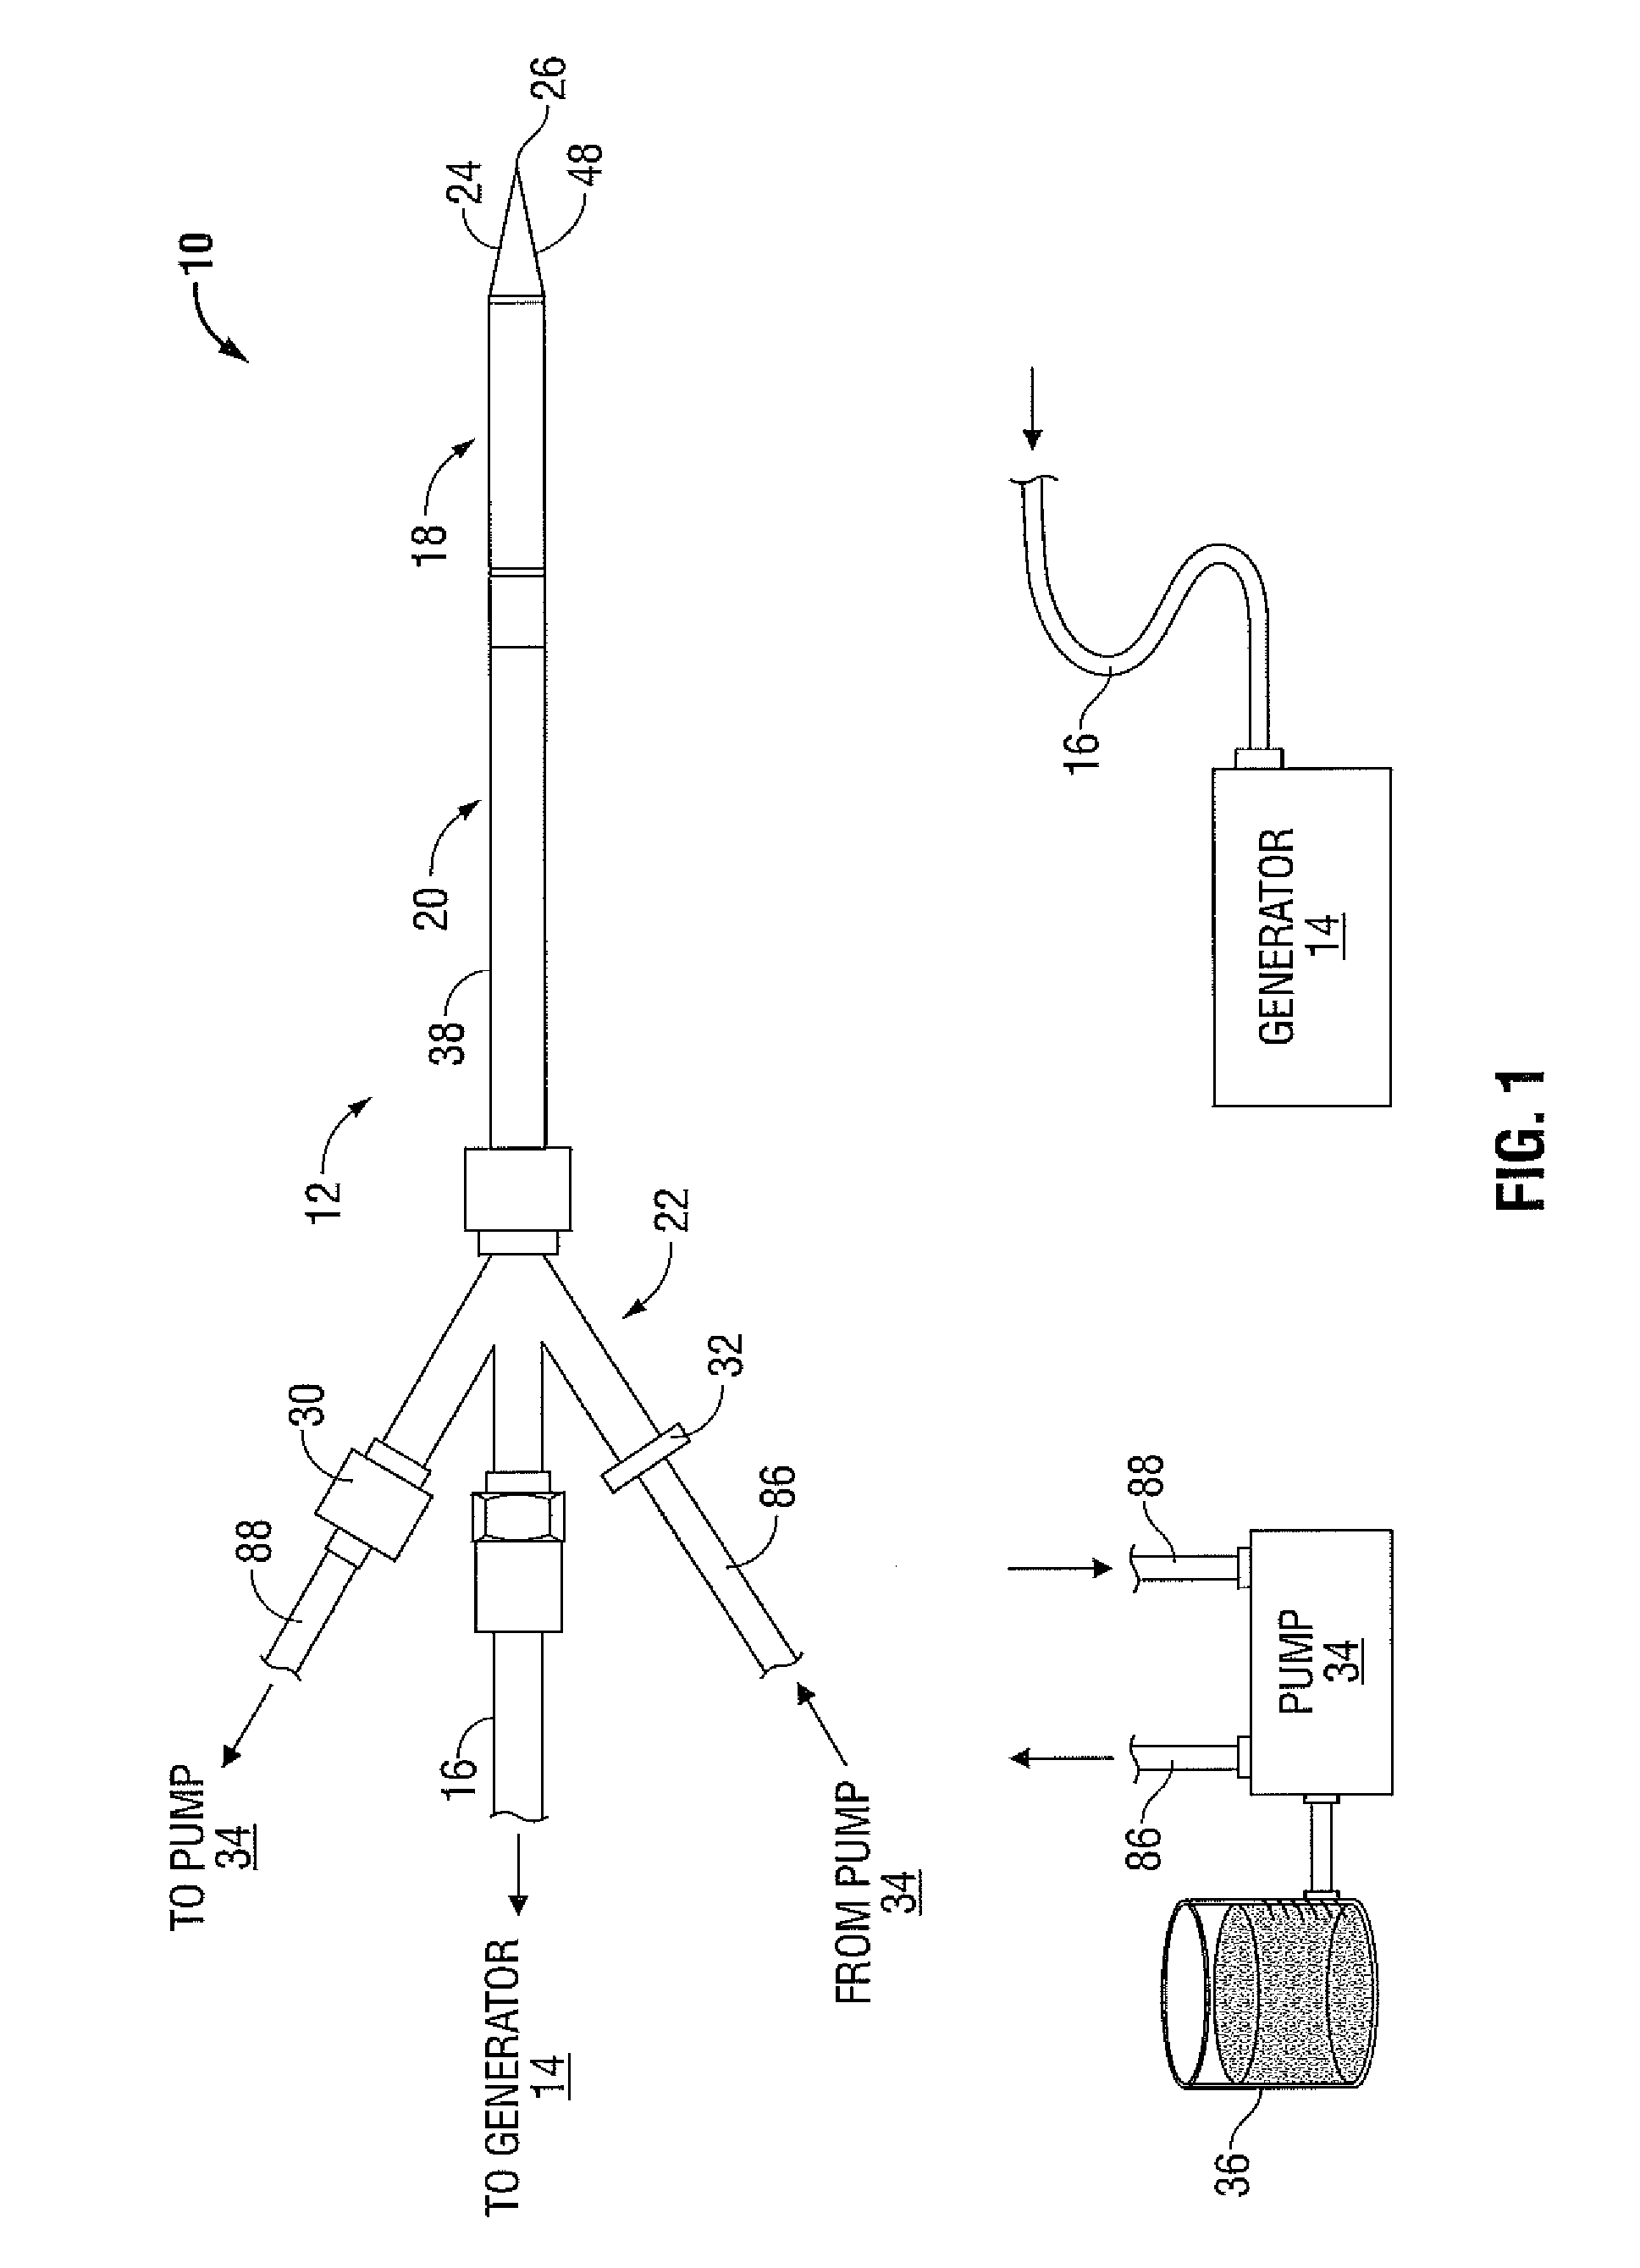 Method for Constructing a Dipole Antenna